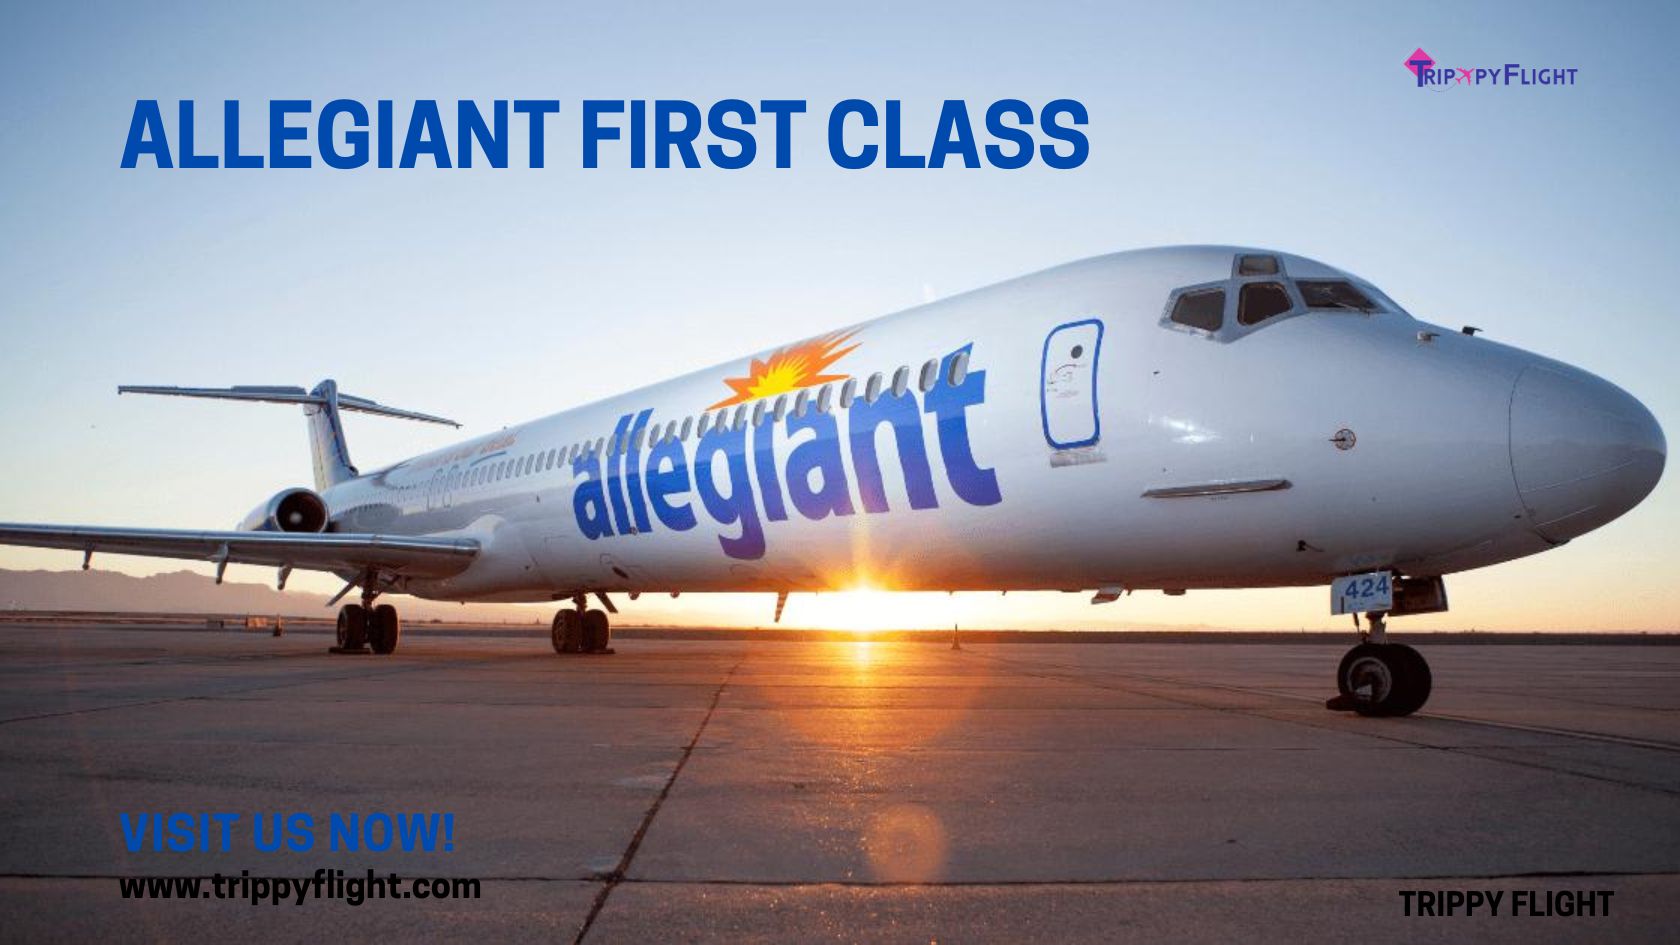 First Class on a Budget? Upgrading Your Allegiant Flight Experience